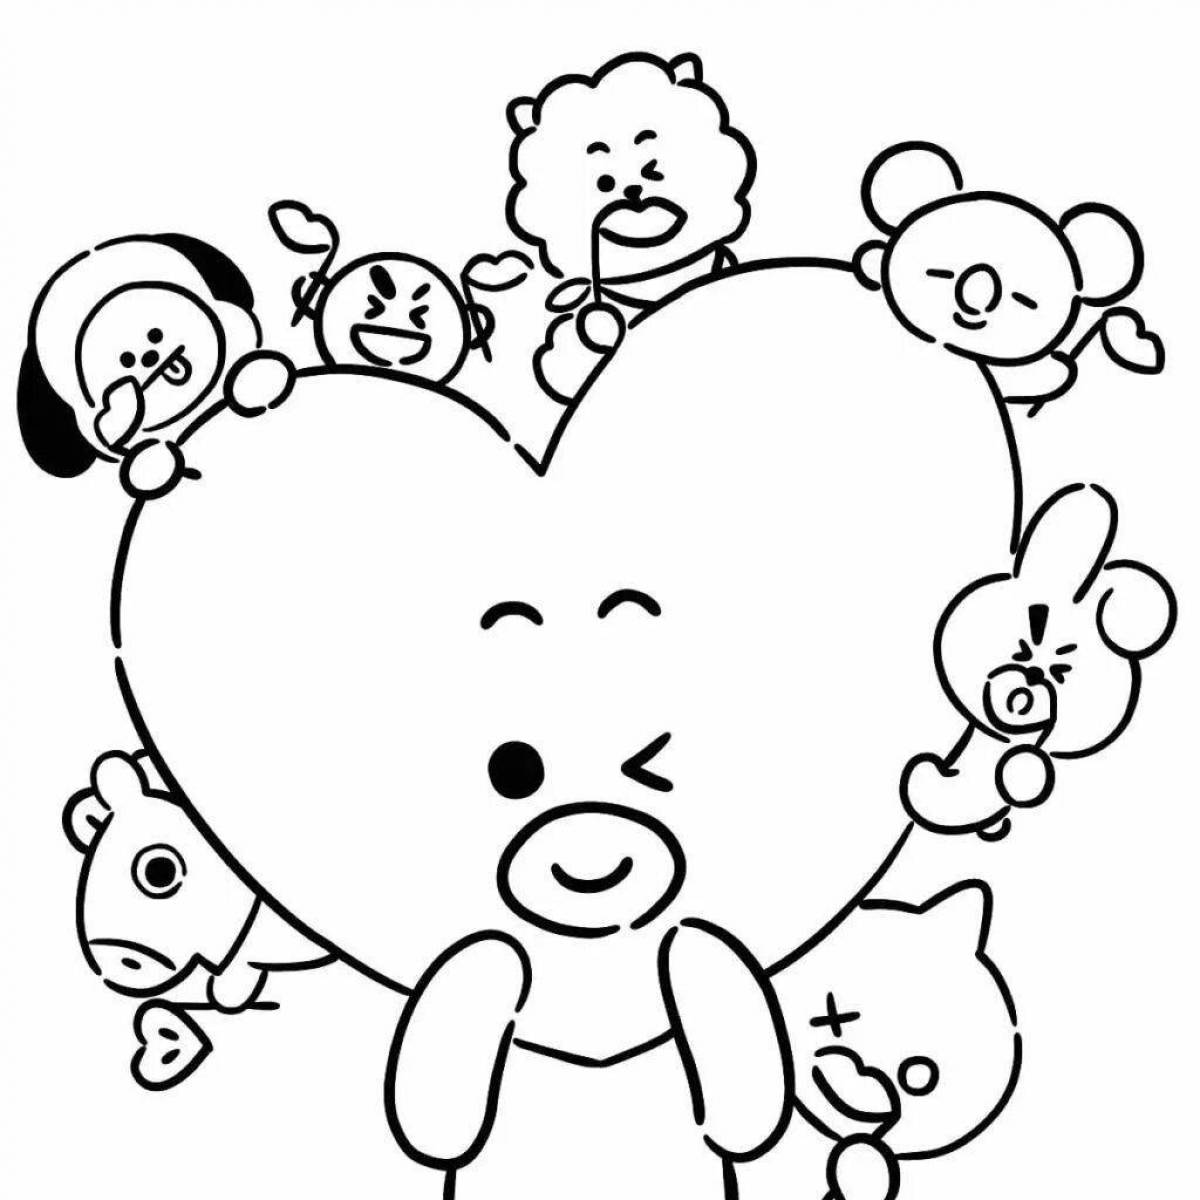 Radiant coloring page tue21